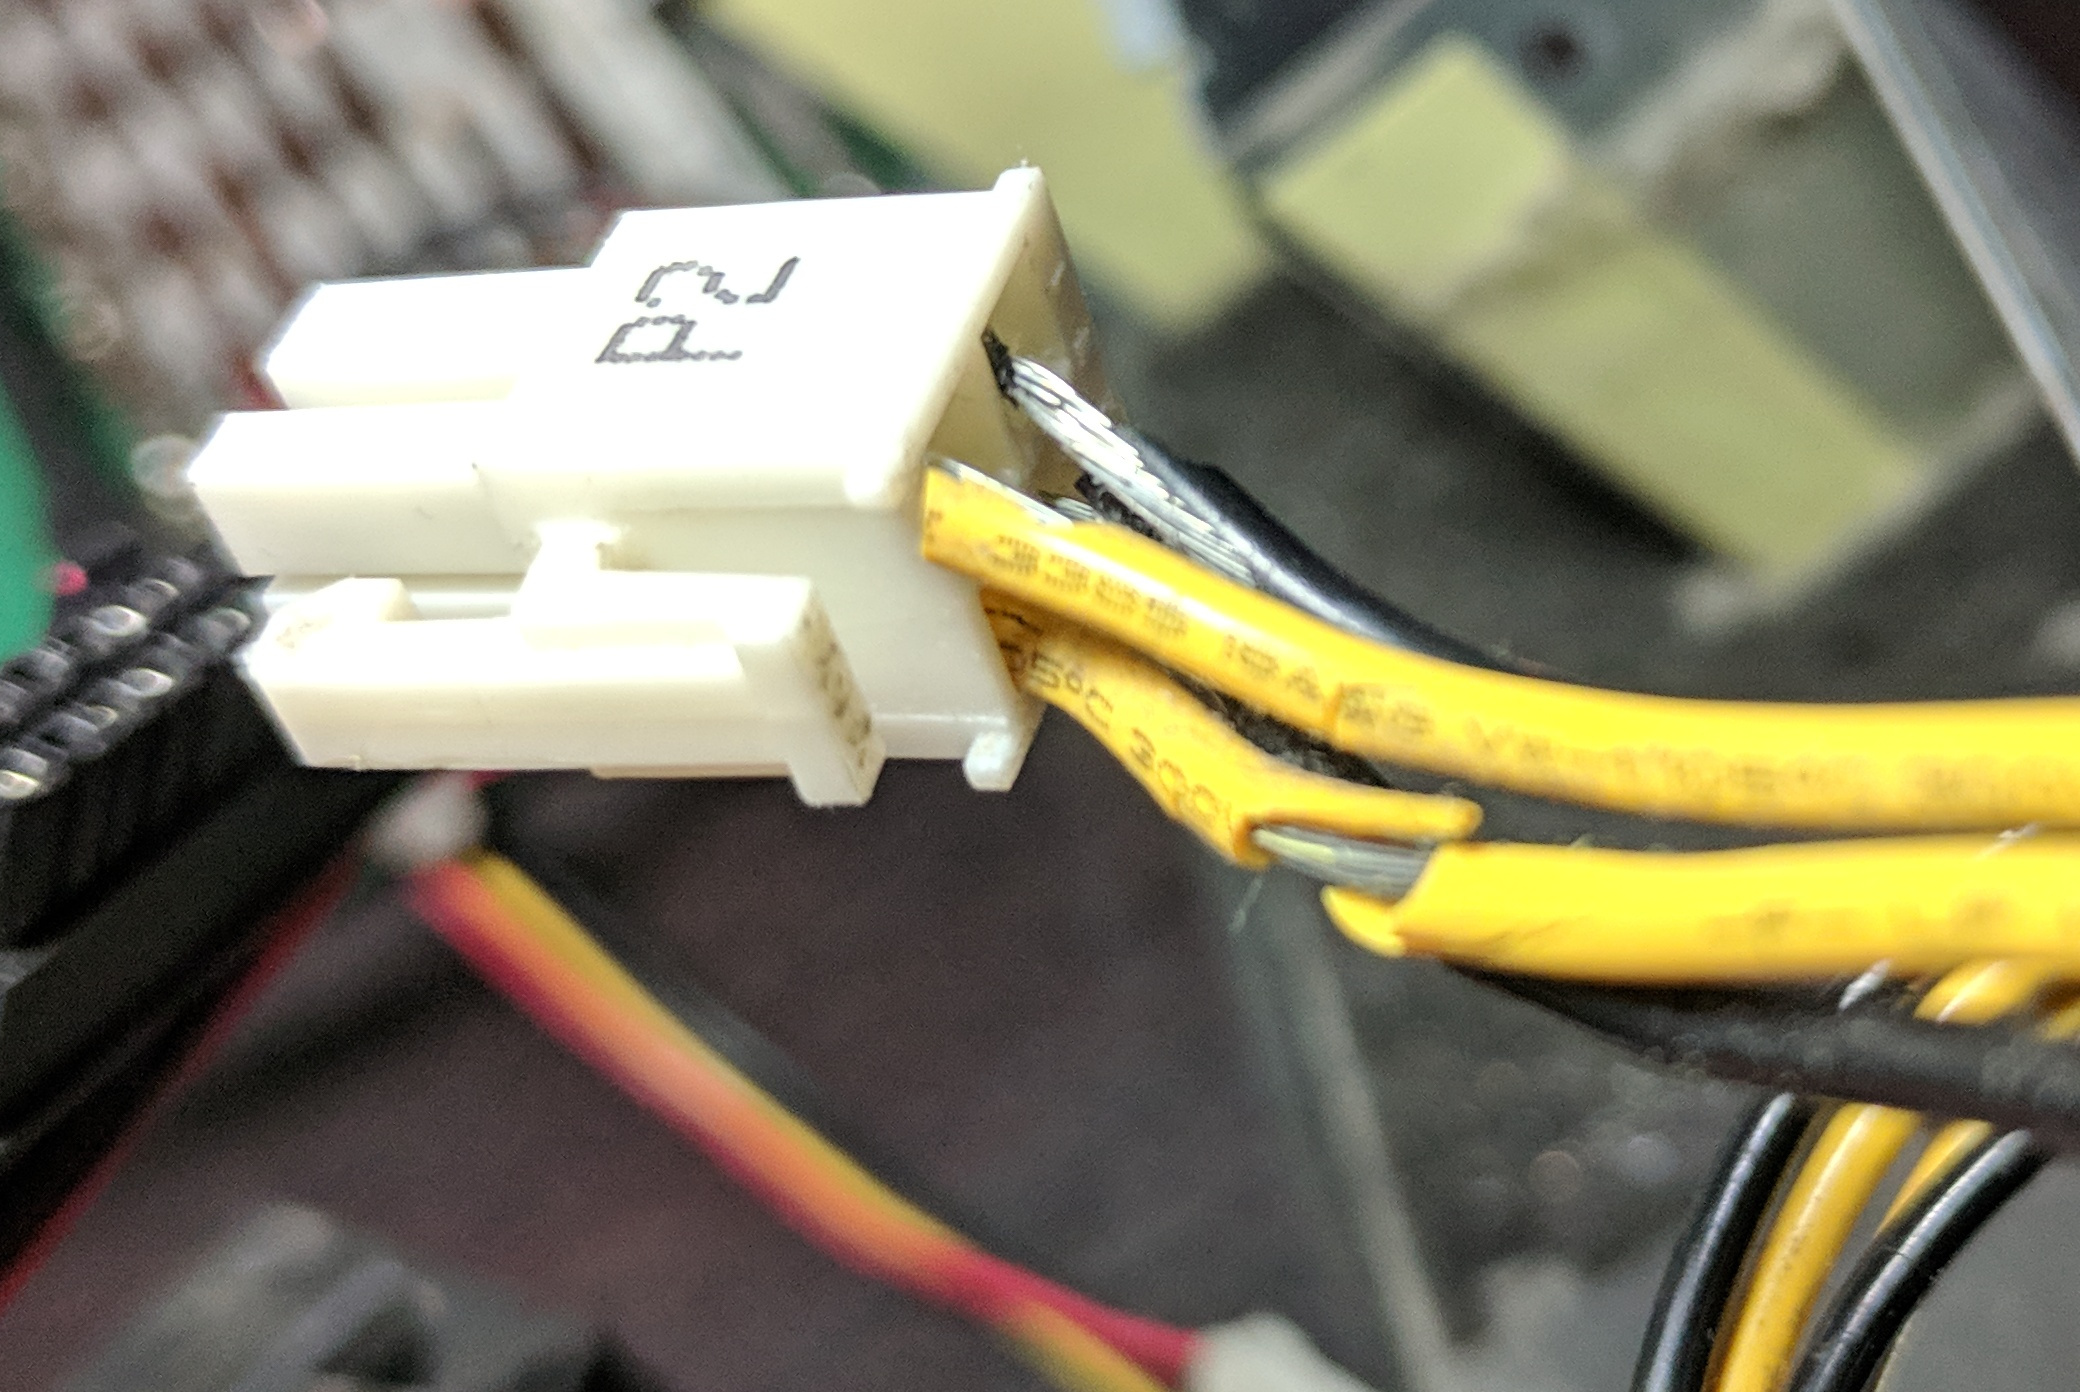 Cracked external power supply wires